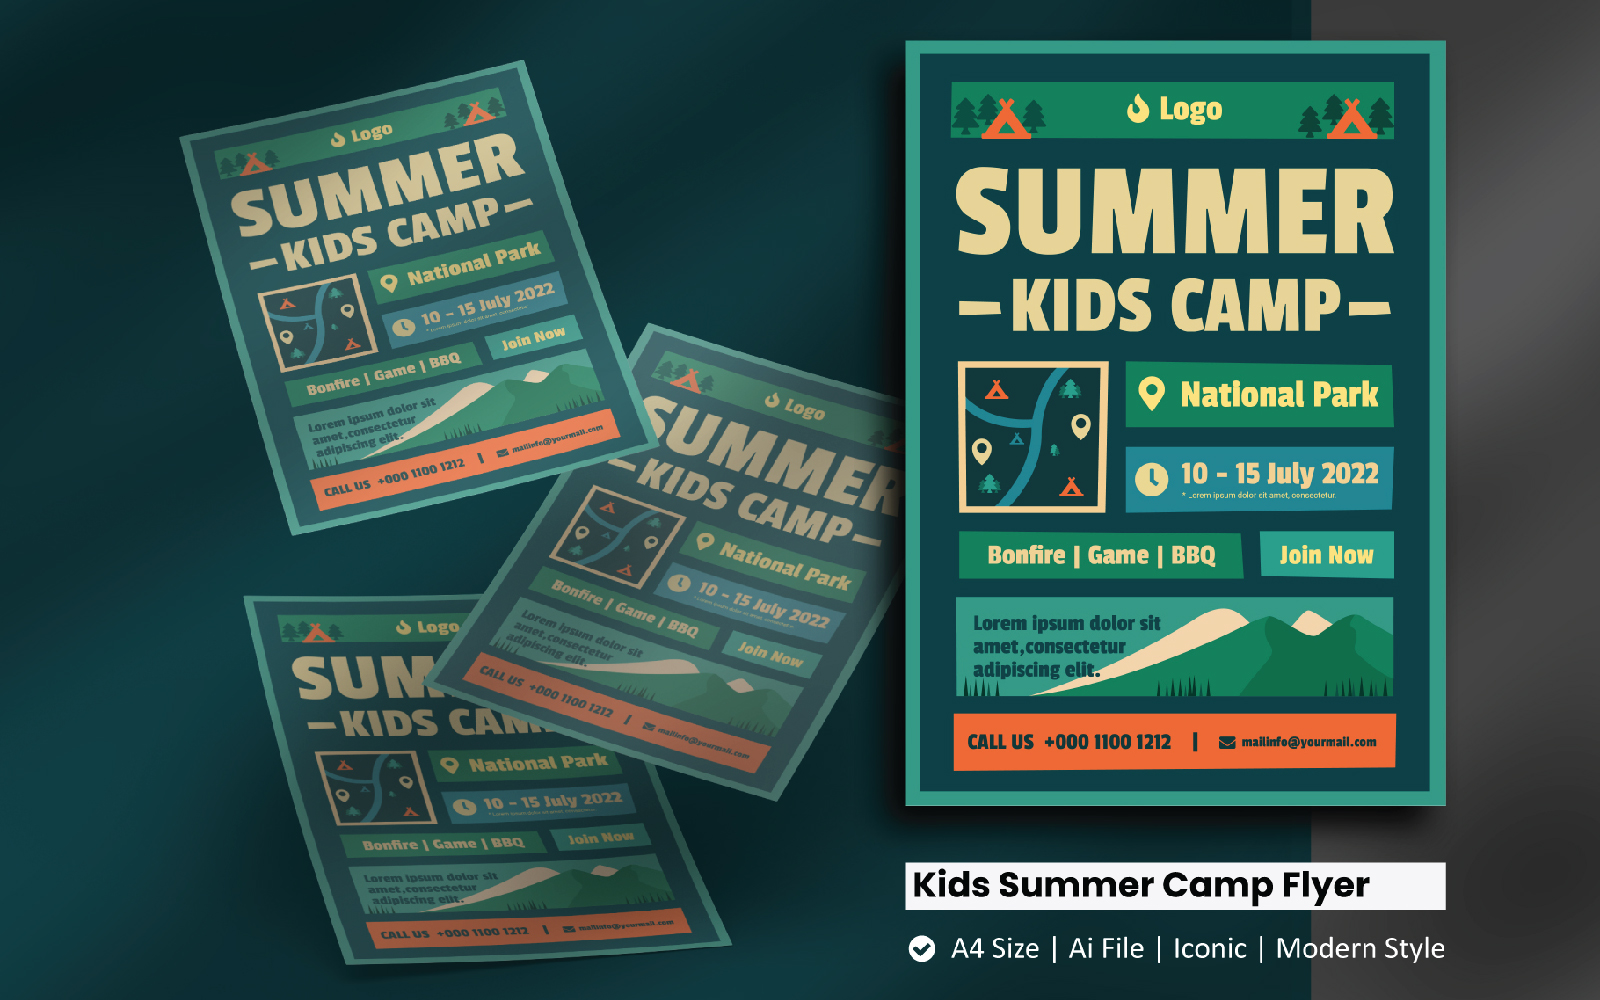 Kids Summer Camp Flyer Corporate Identity Template